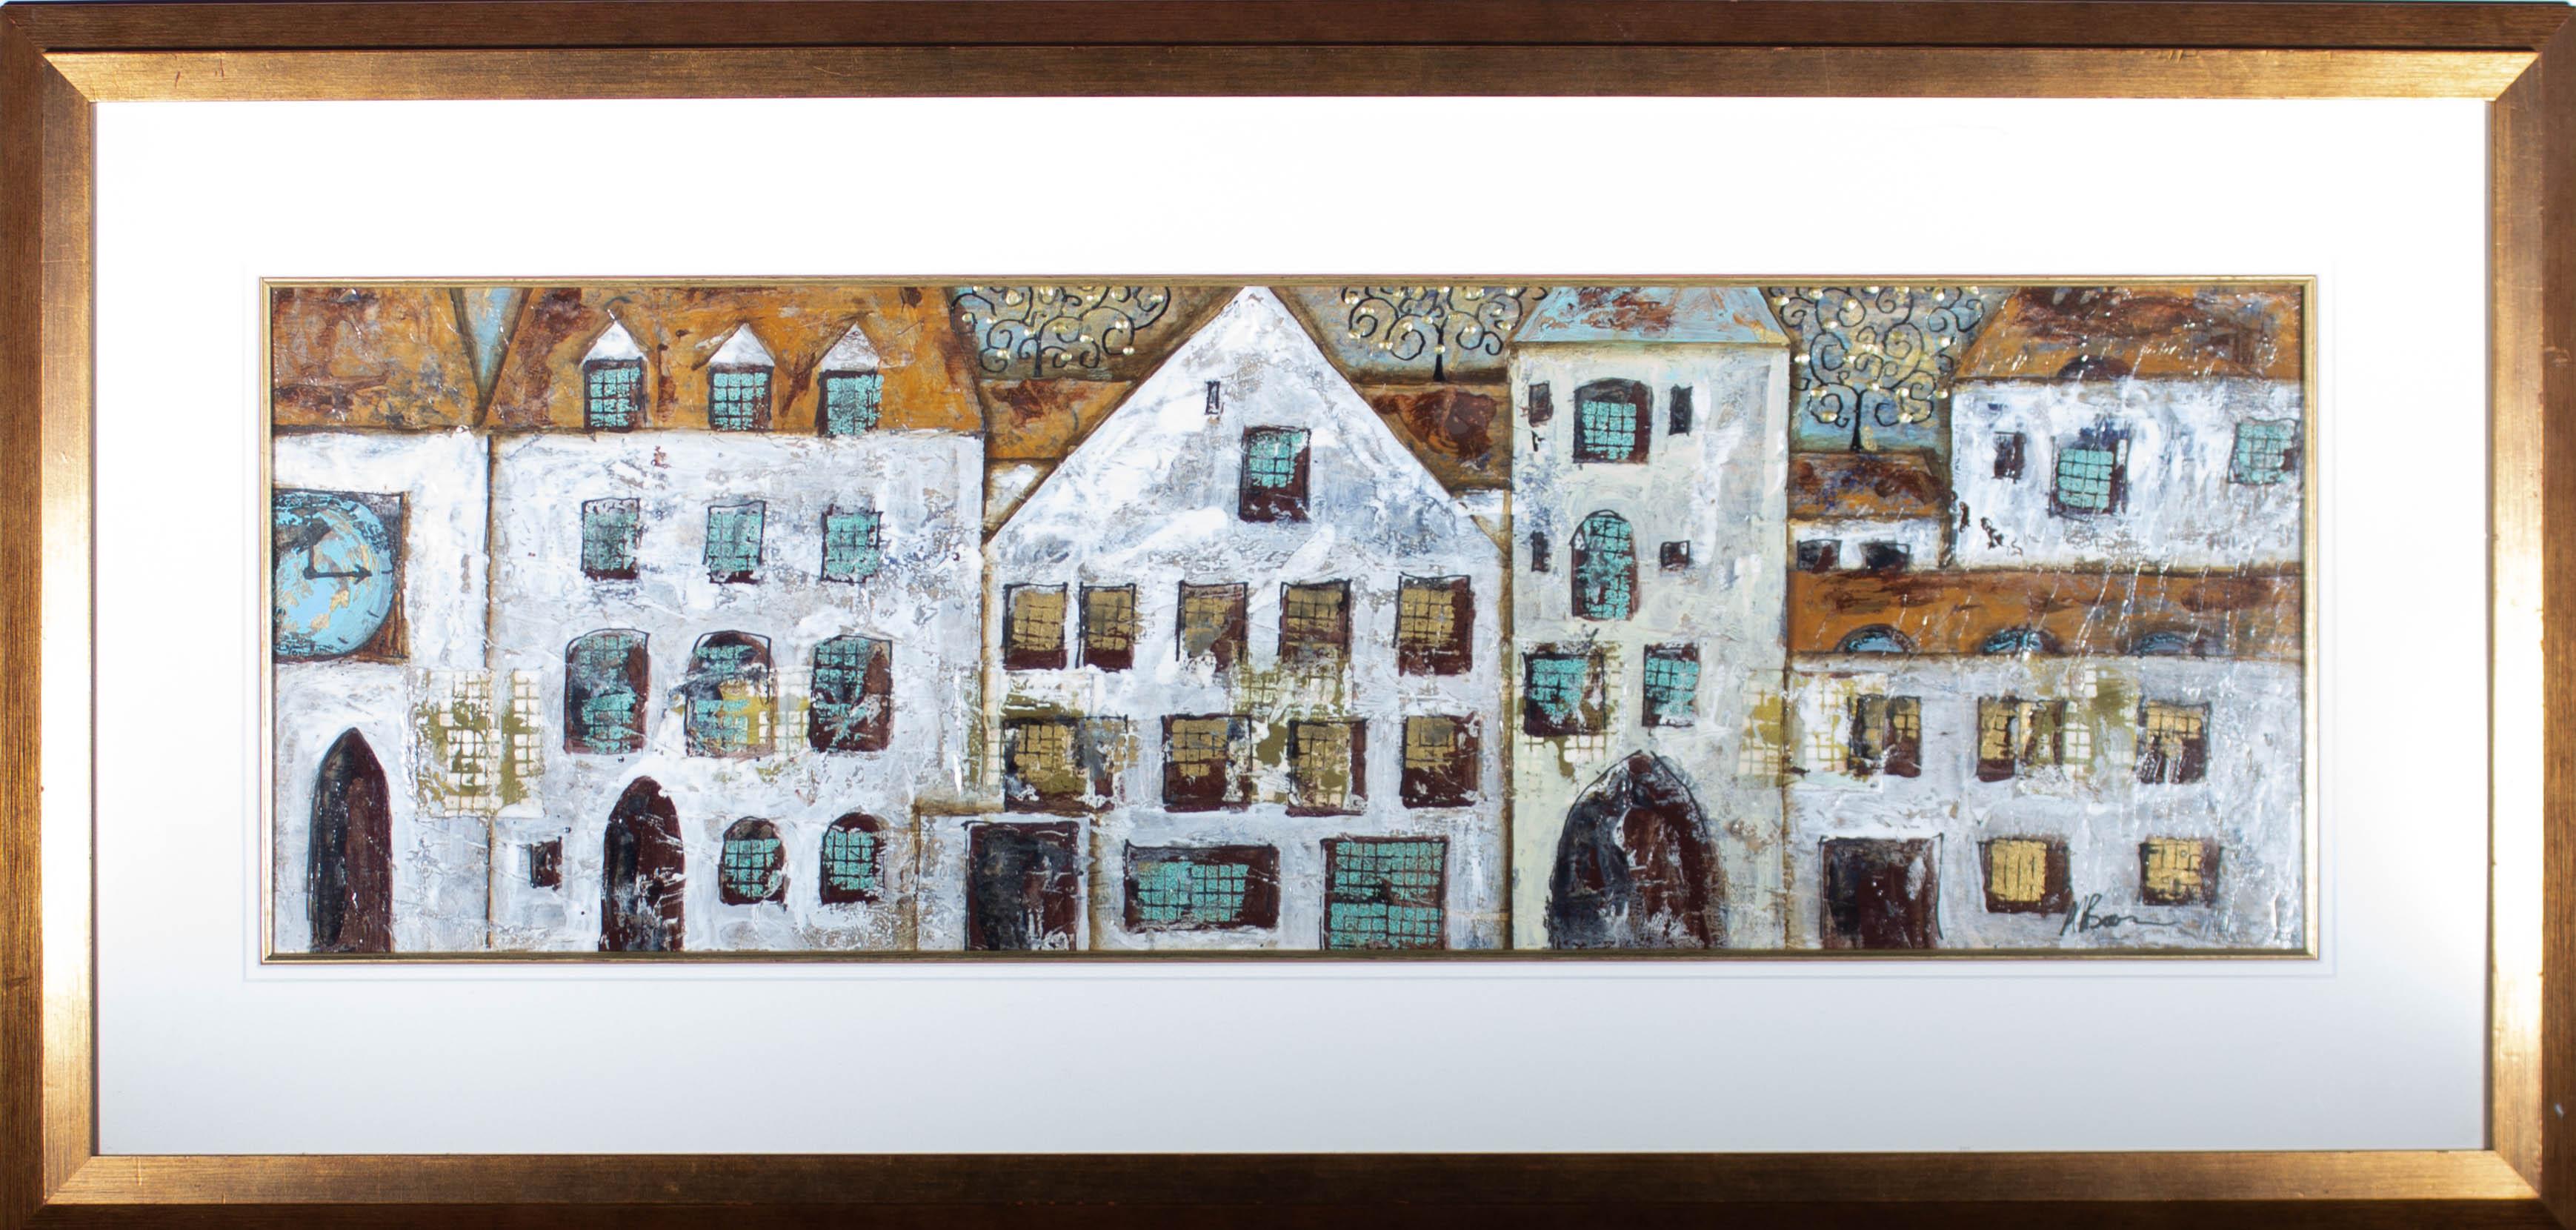 A panoramic mixed media European street scene. Presented glazed in a white double mount with a gilt-effect inner edge and a distressed gilt-effect wooden frame. Signed to the lower-right edge. On board.

